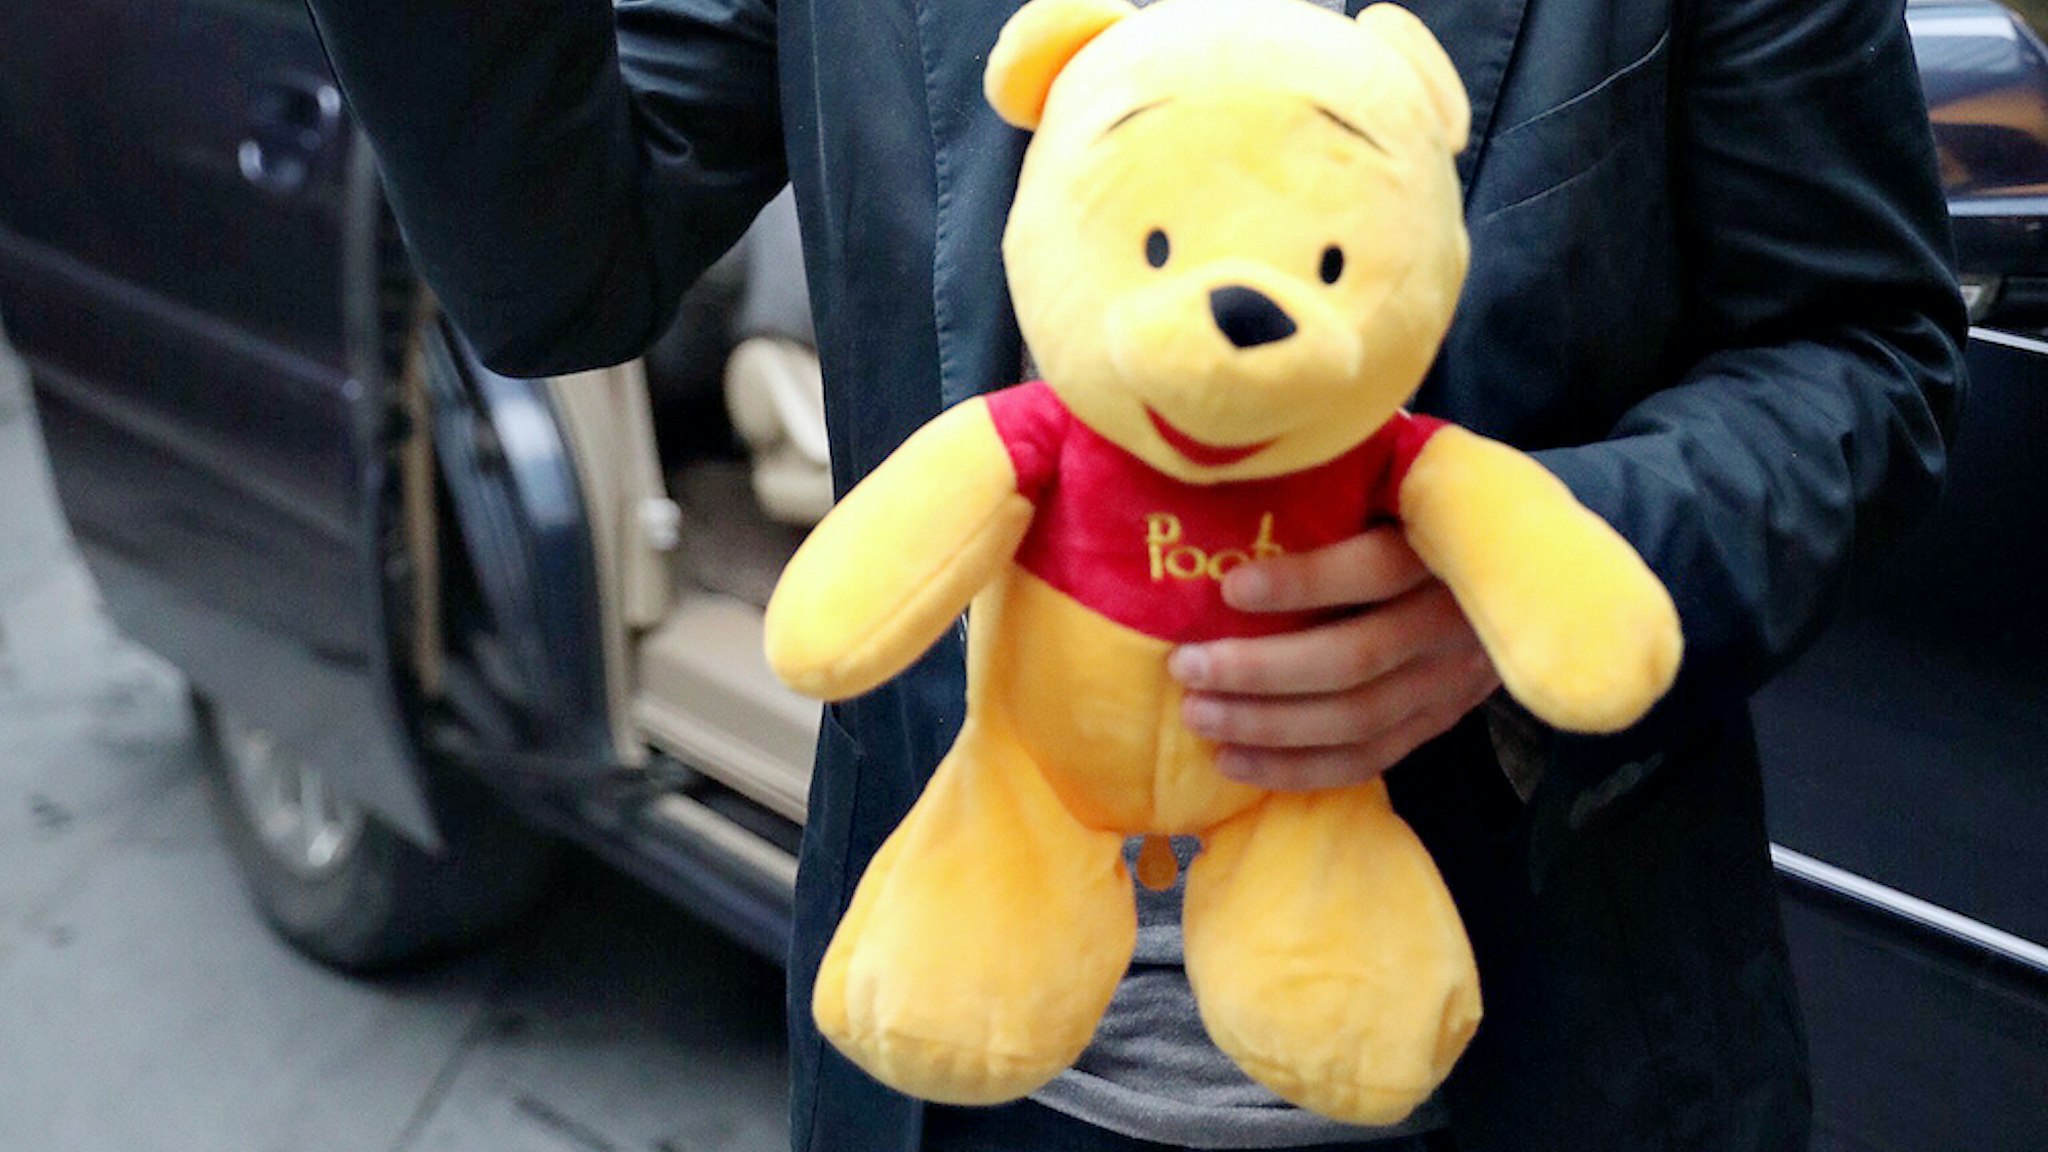 American actor Jesse Eisenberg holding a Pooh Bear toy given by fans is seen on June 30, 2018 in Shanghai, China. (Photo by Visual China Group via Getty Images)